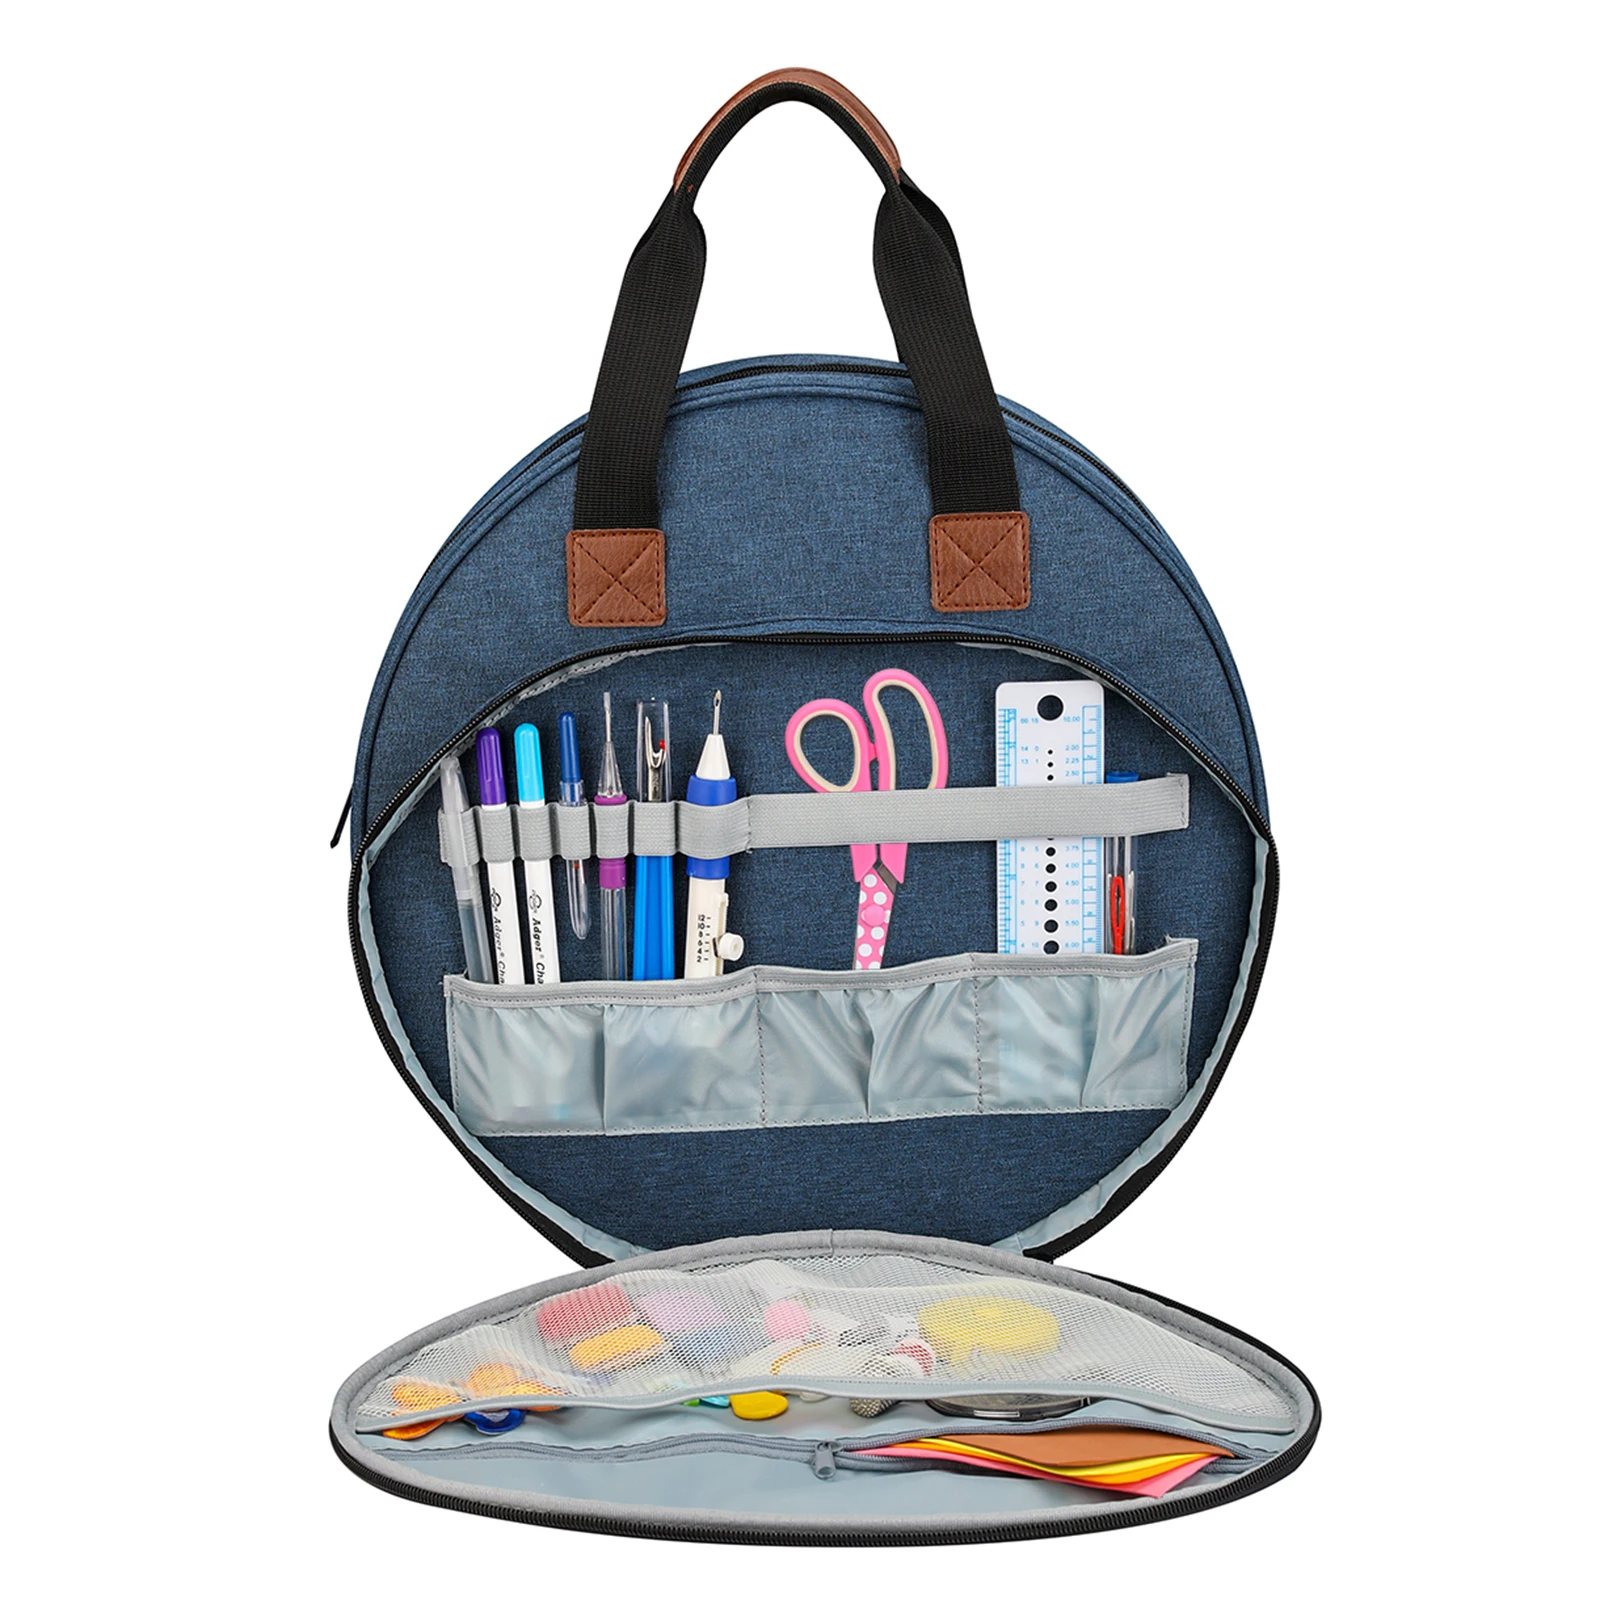 Embroidery Bag Portable Project Bag Storage Craft Organizers for Embroidery Hoops, Cross Stitch Supplies and Sewing Tools Kits